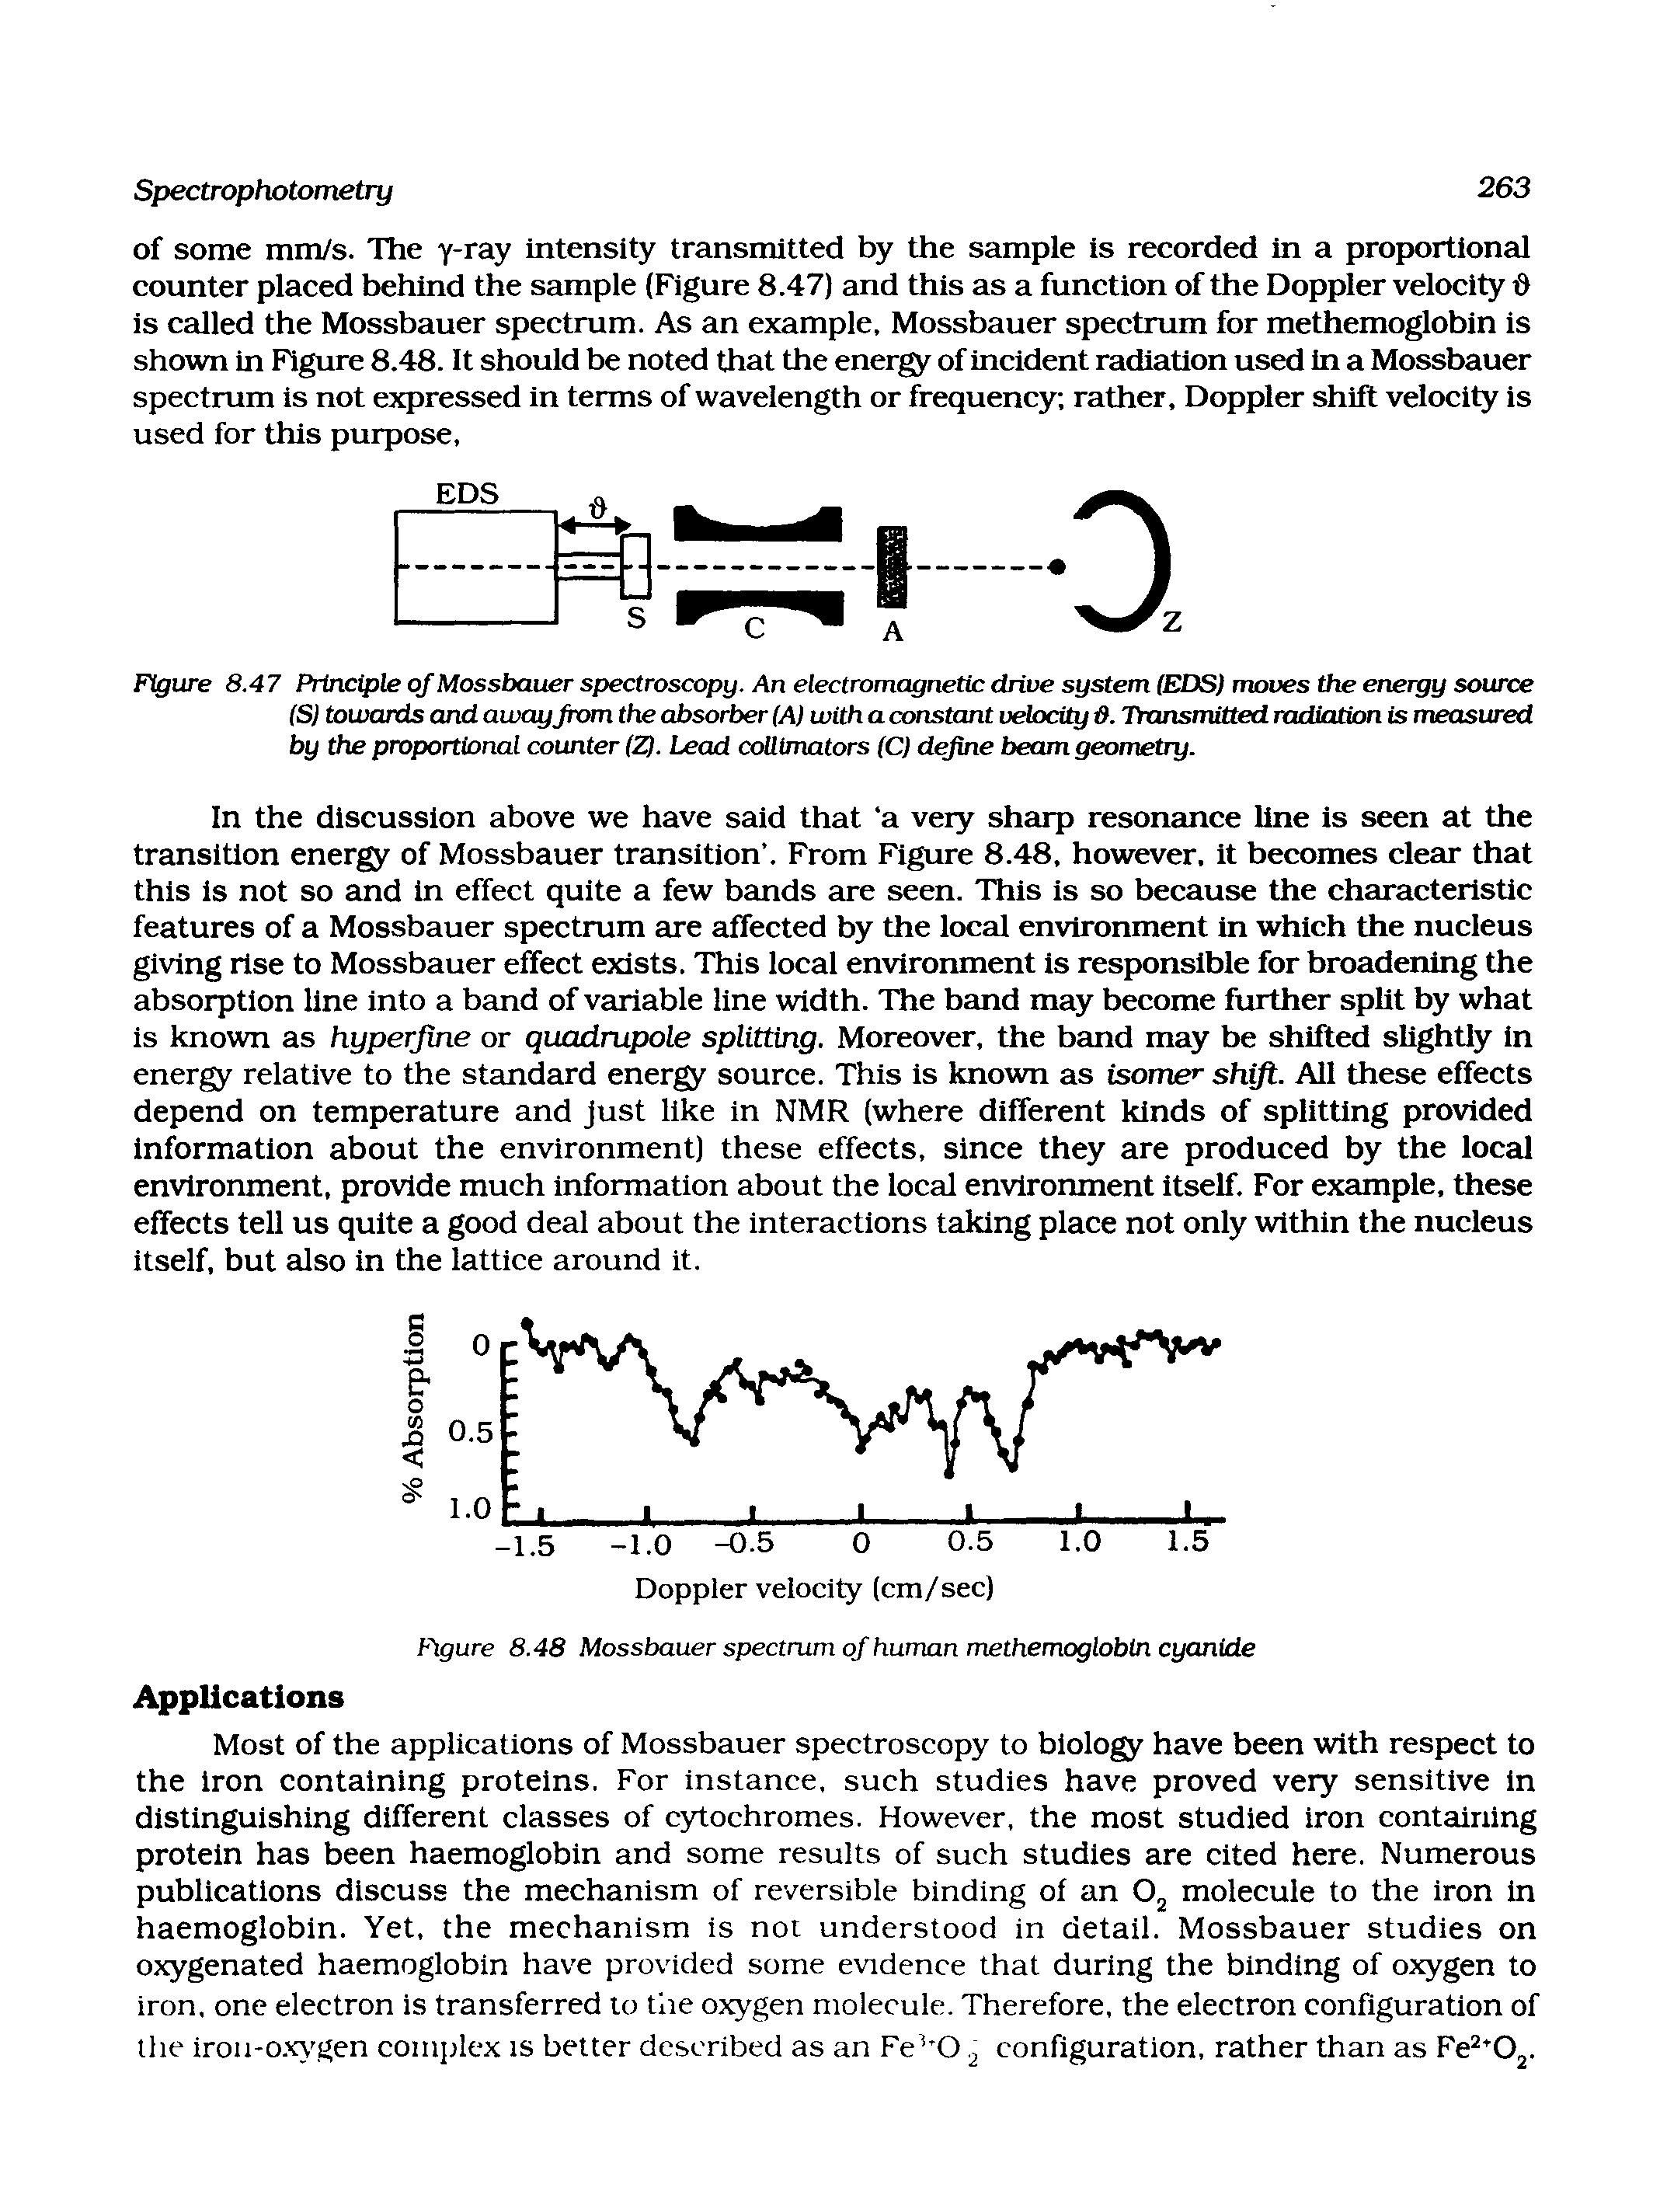 Figure 8.47 Principle of Mossbauer spectroscopy. An electromagnetic drive system (EDS) moves the energy source (Sj towards and awayficm the absorber (A) with a constant velocity 8. Transmitted radiation is measured by the proportional counter (Z). lead collimators (C) dejme beam geometry.